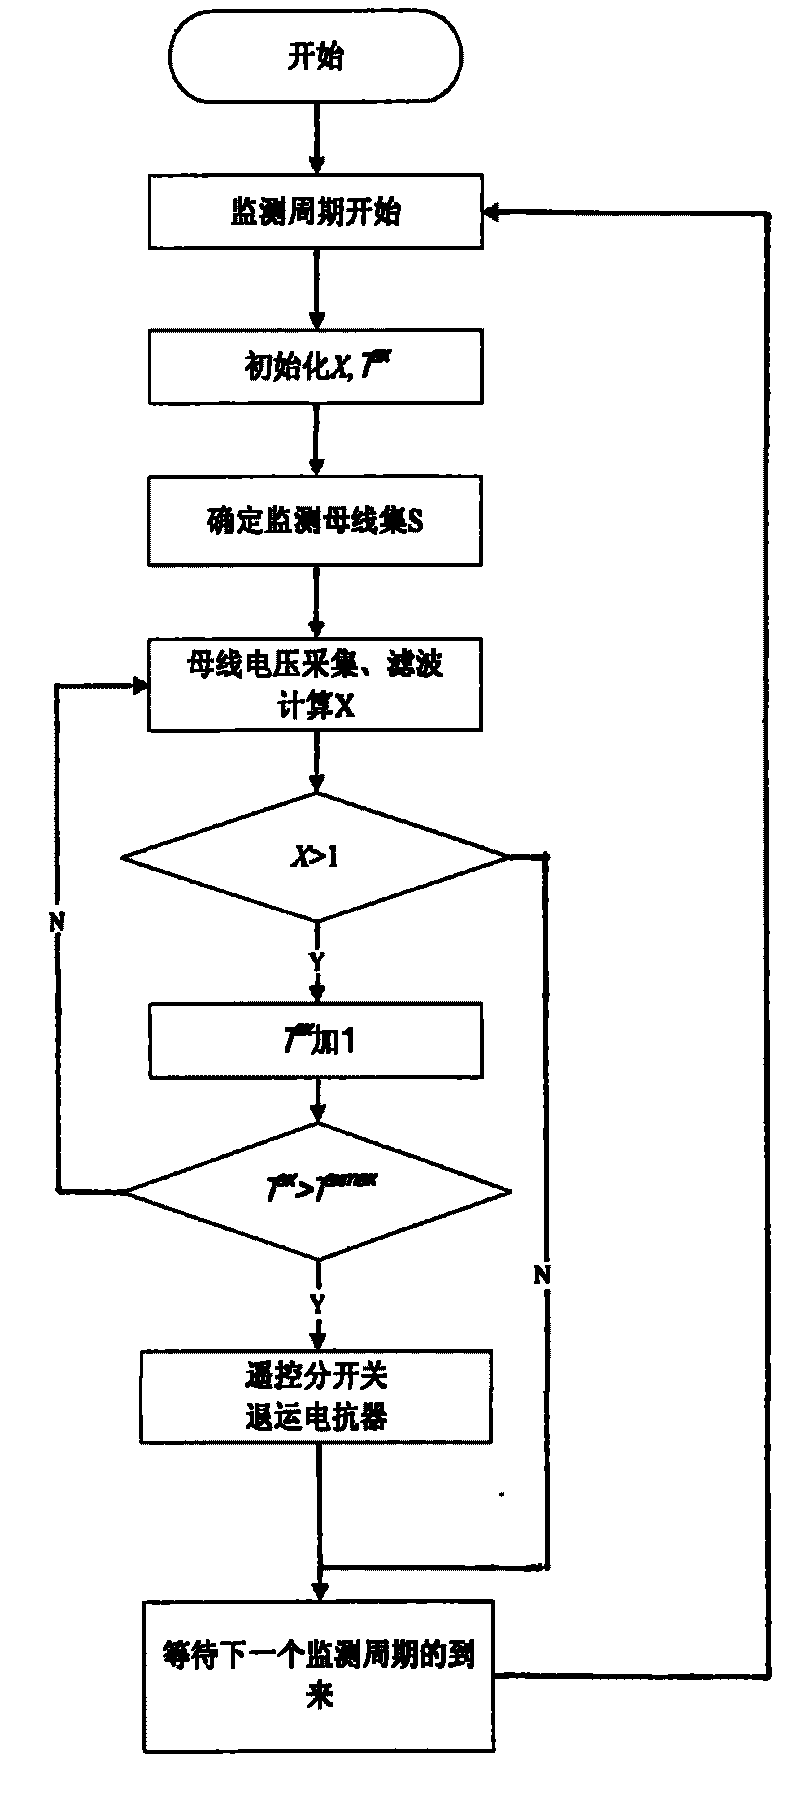 Remote automatic control method of high-voltage shut reactor considering safety of system voltage